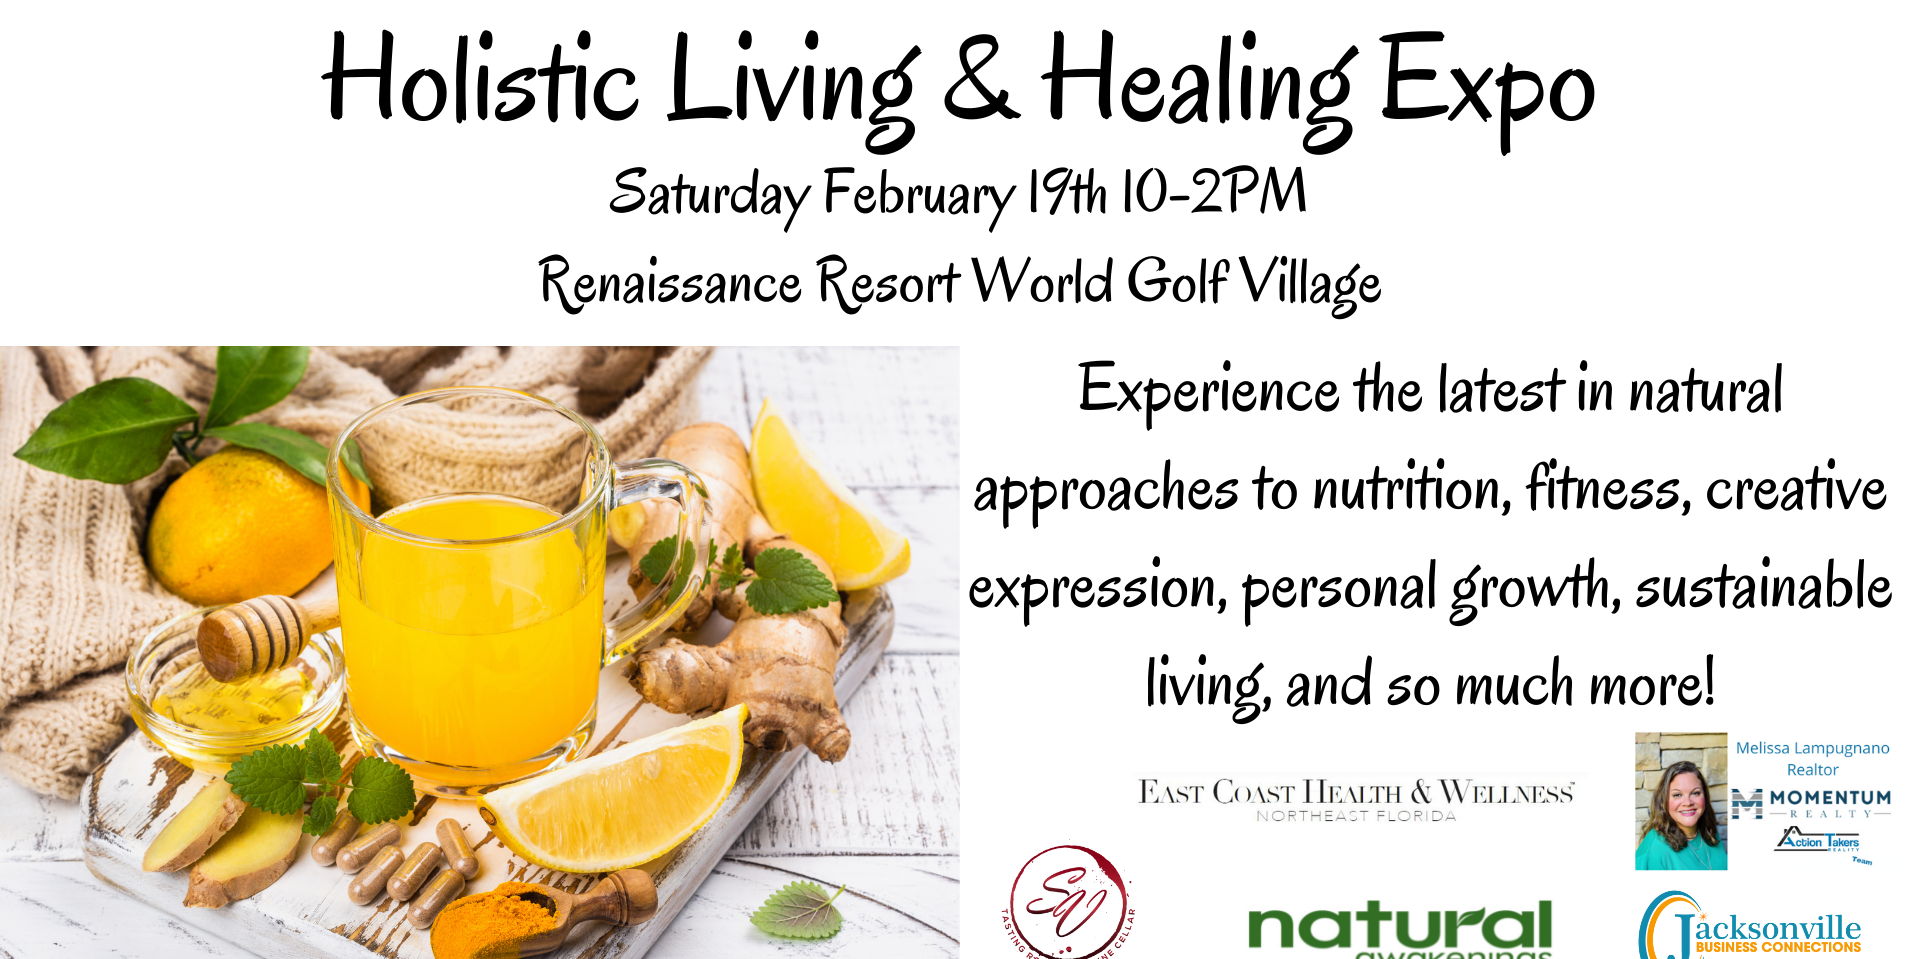 Holistic Living & Healing Expo promotional image